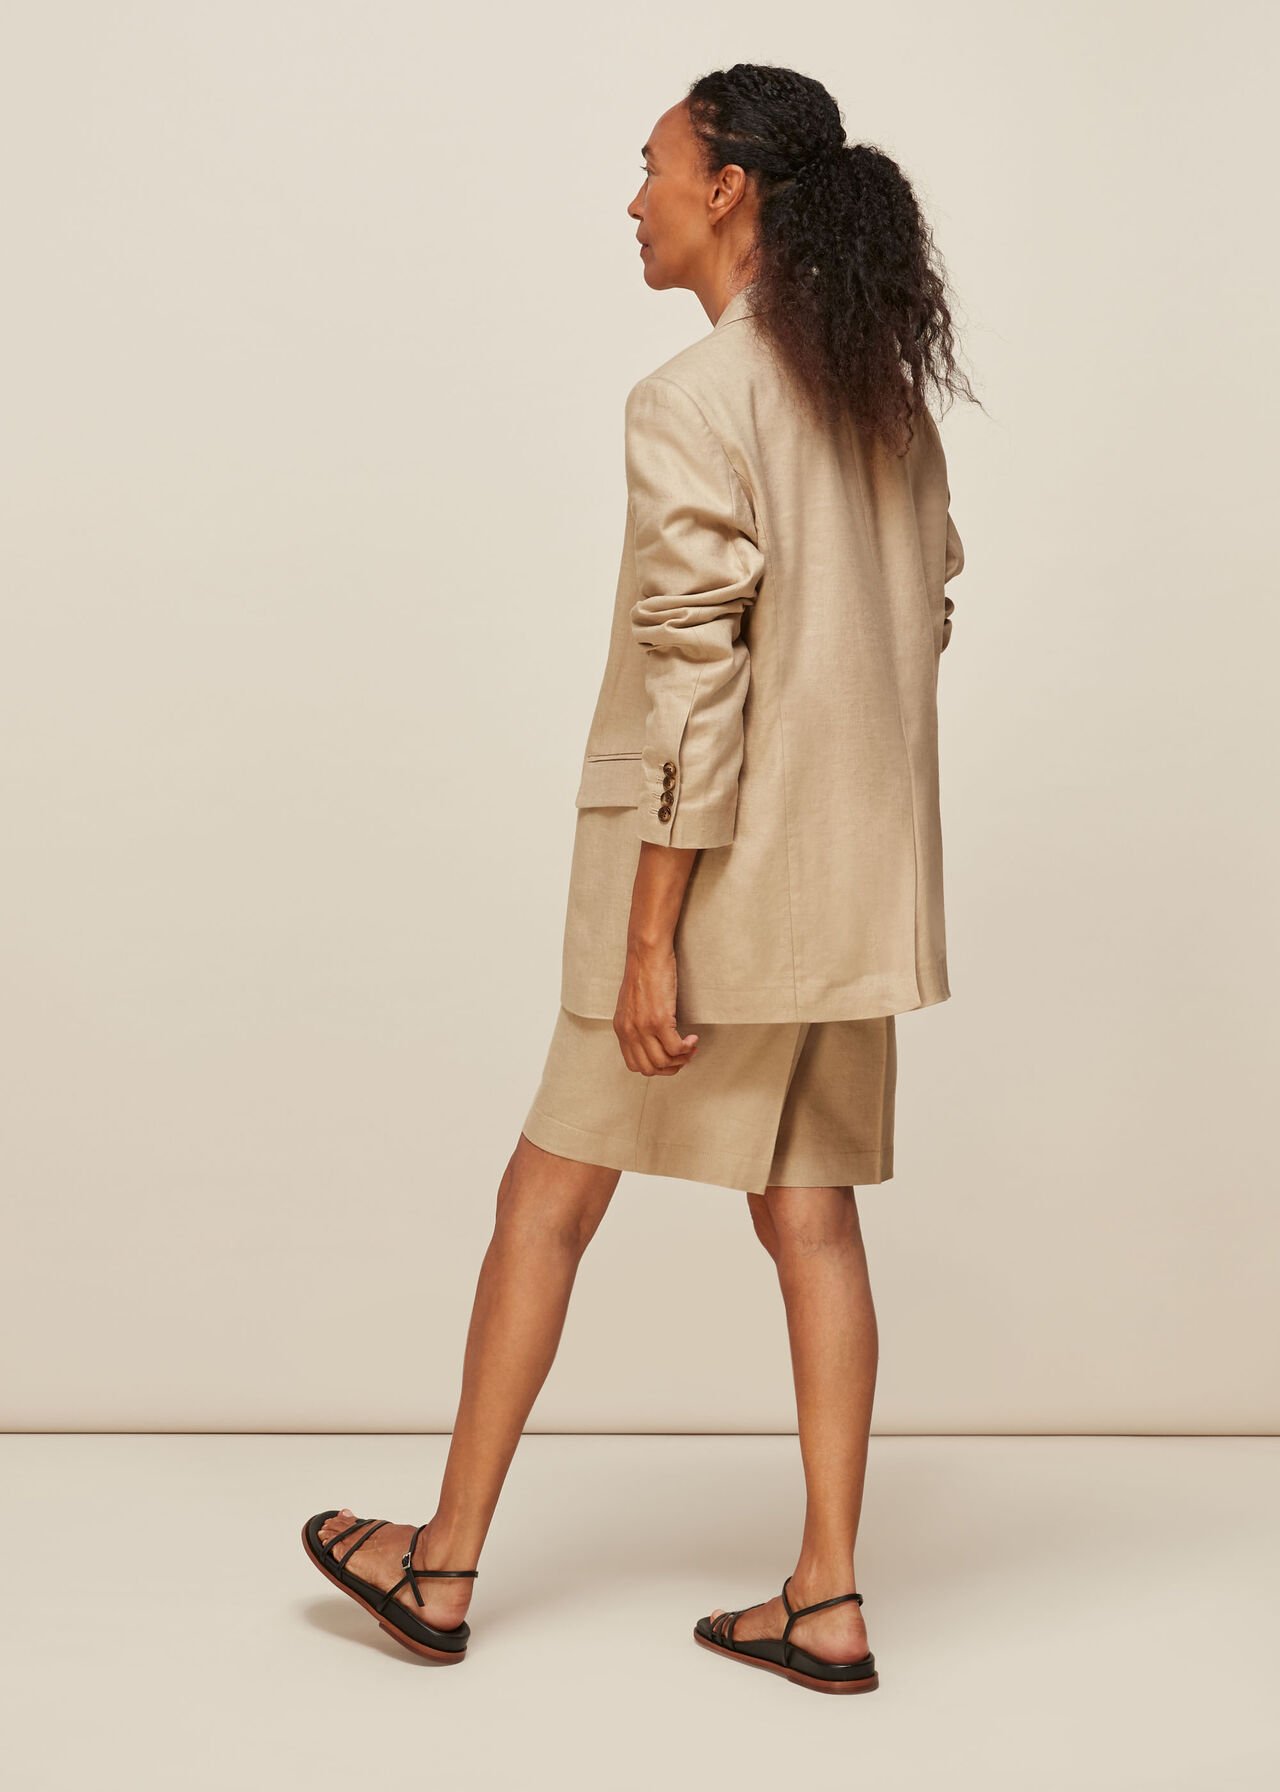 Tailored Neutral Jacket